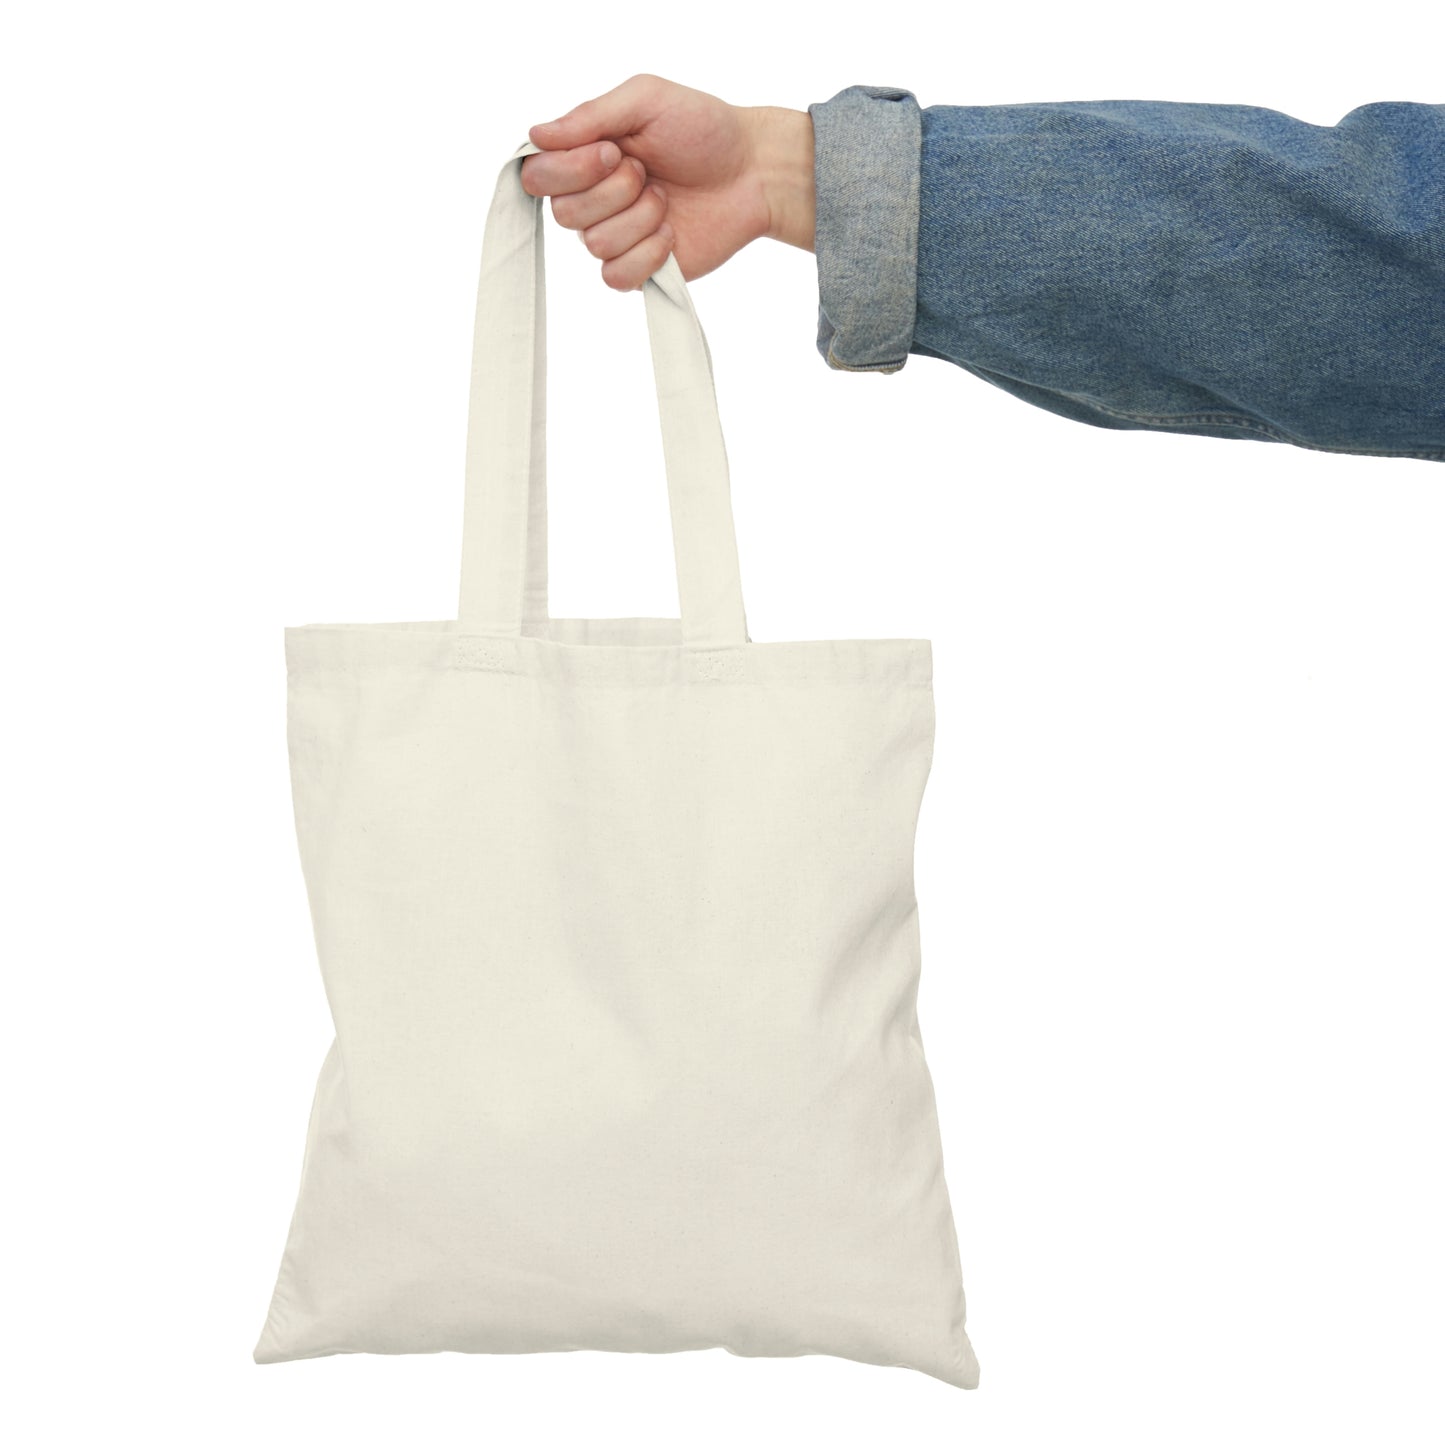 Thornfalcon - Natural Tote Bag